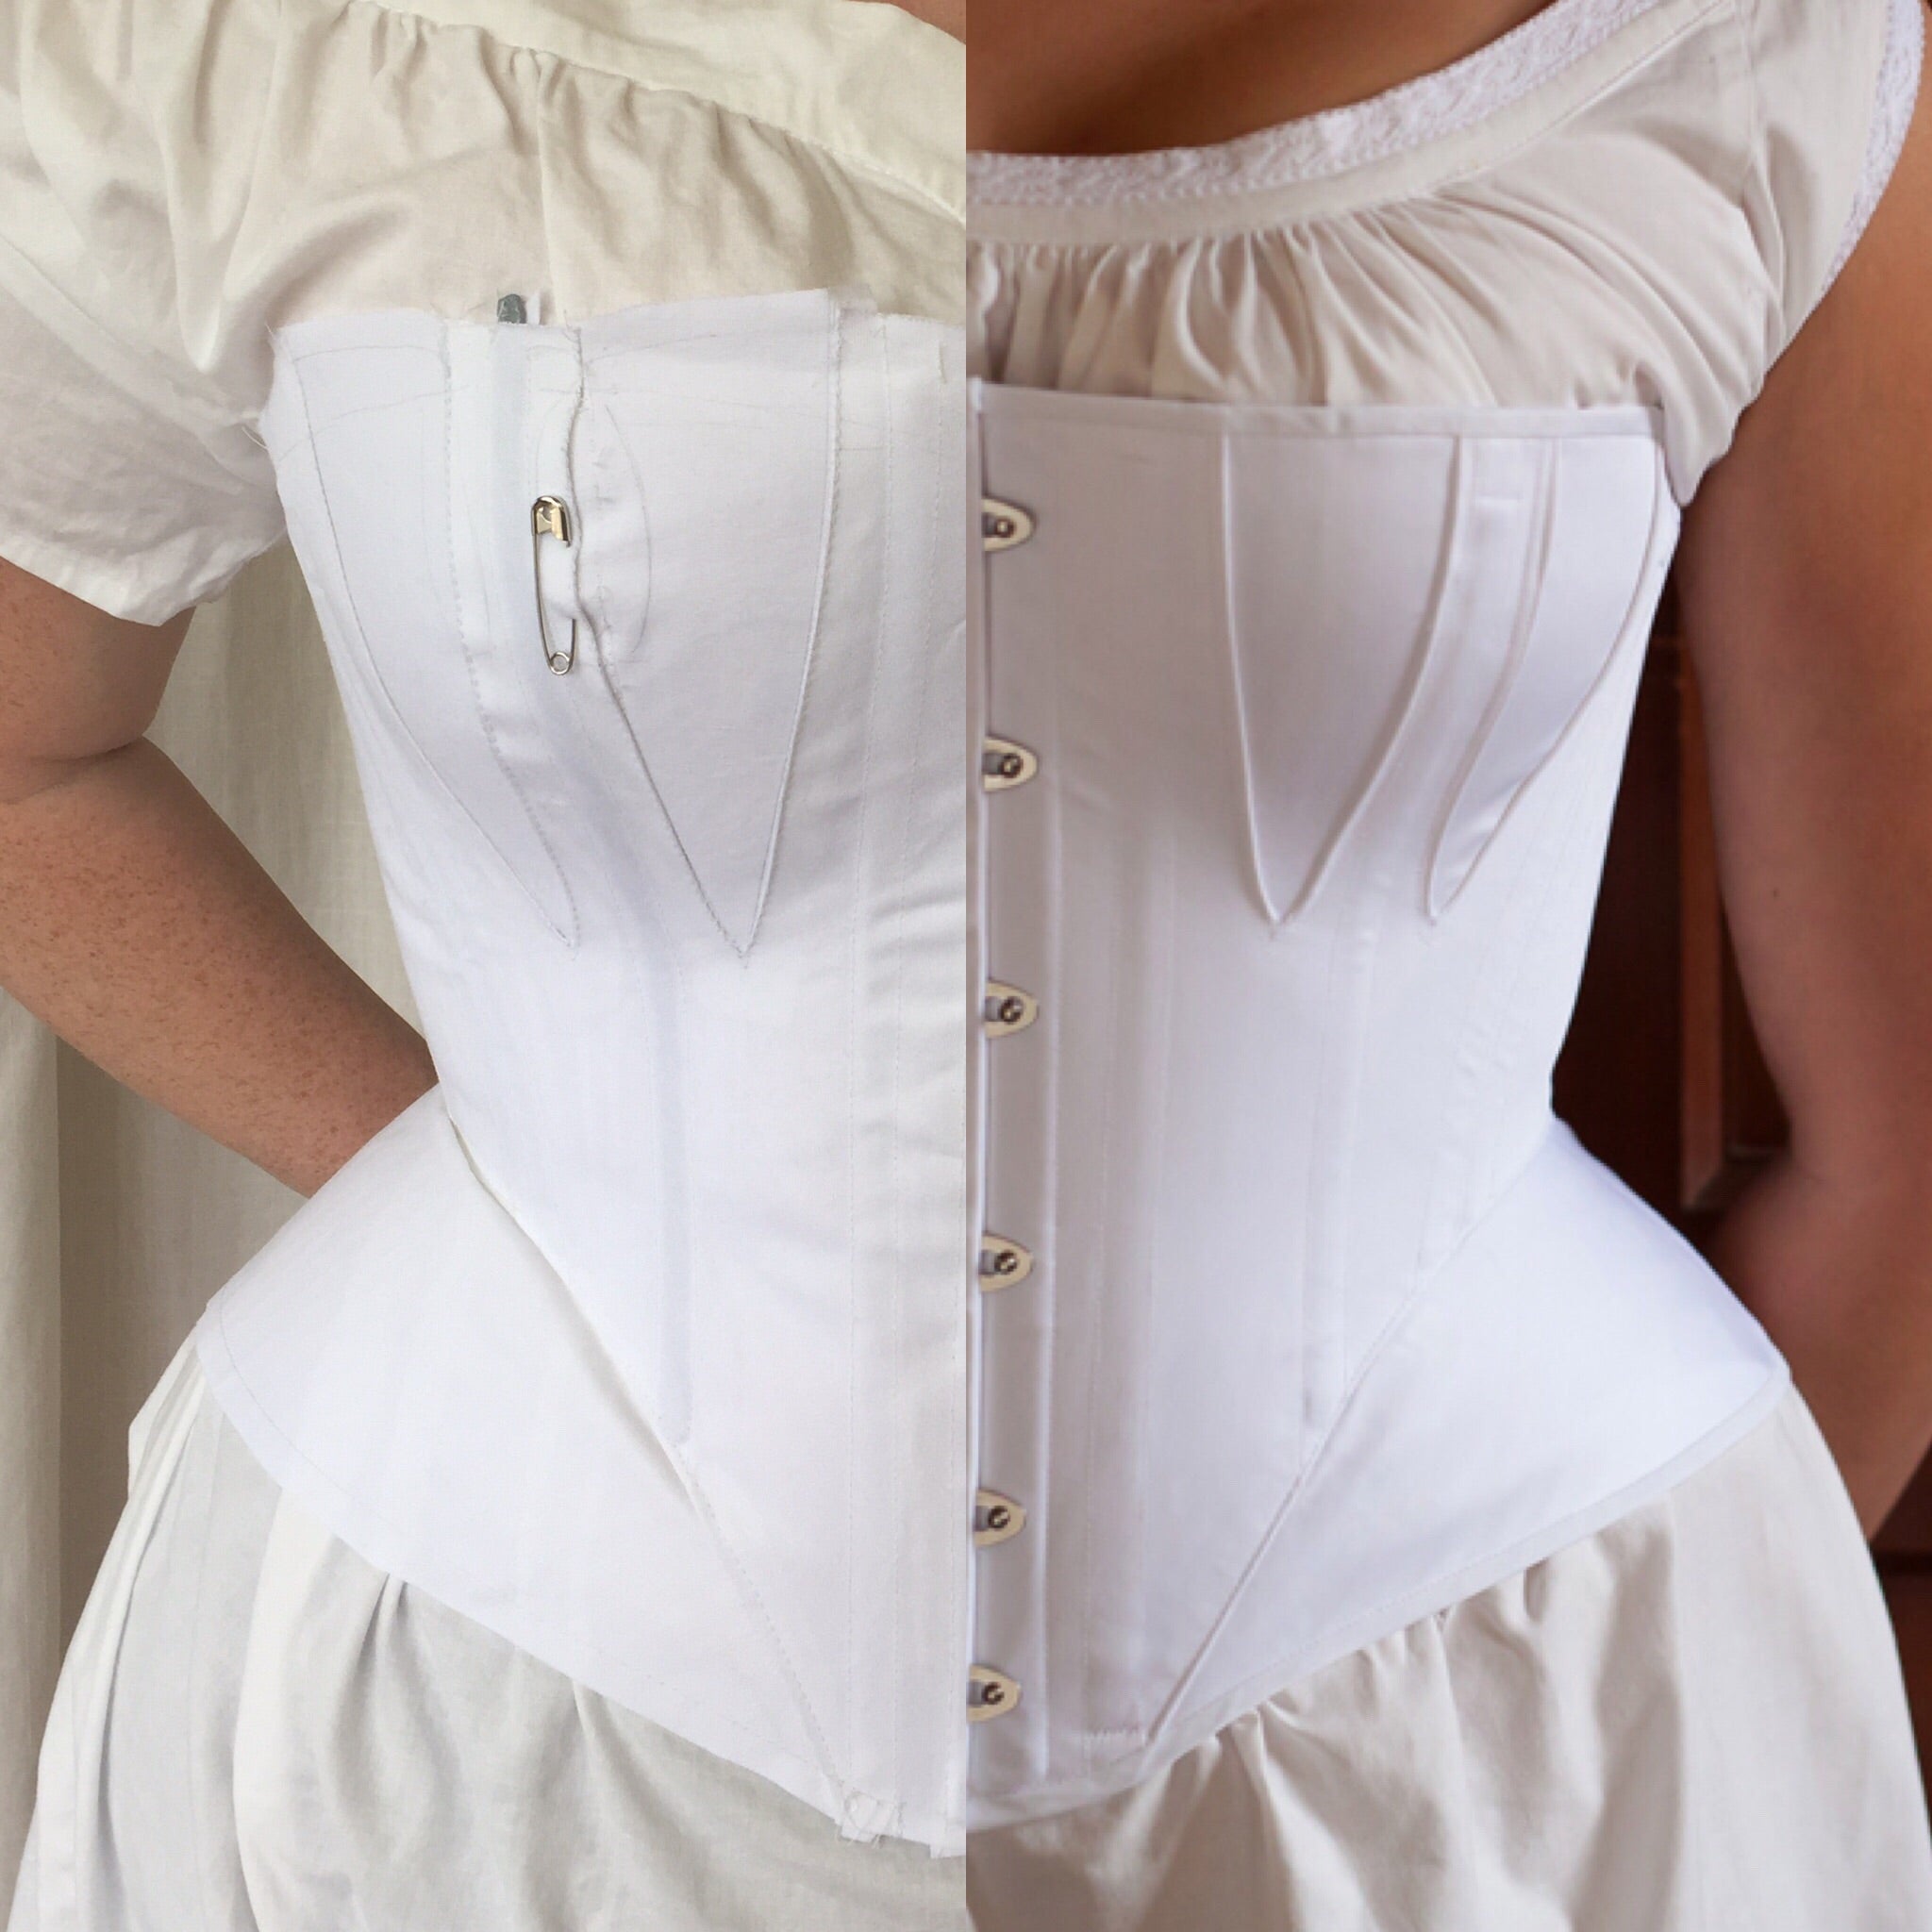 Look at The Bespoke Corset Designs That We Have Got Right Here